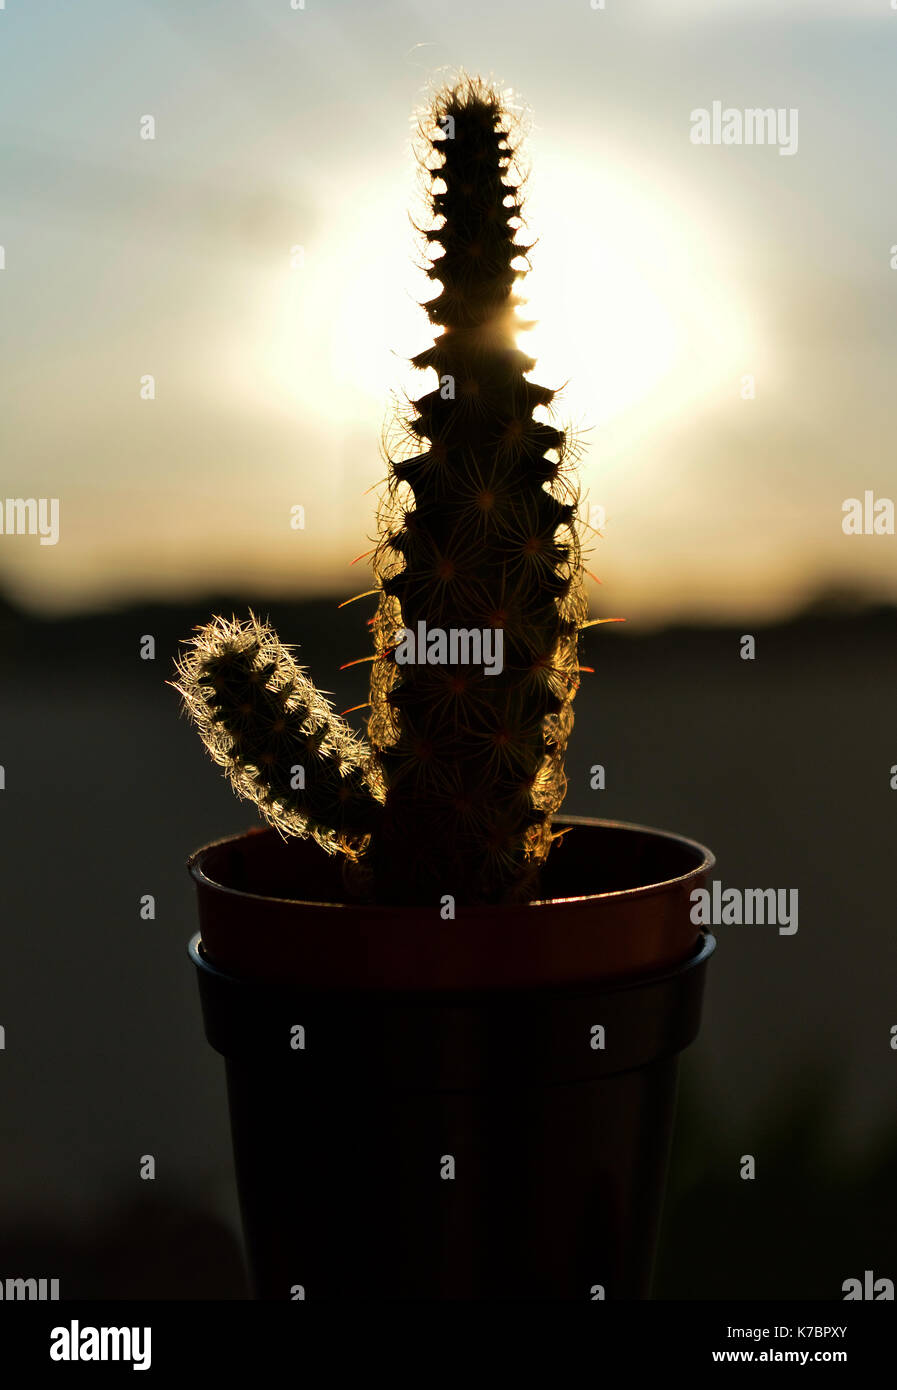 Silhouette of a Cactus against the sun Stock Photo